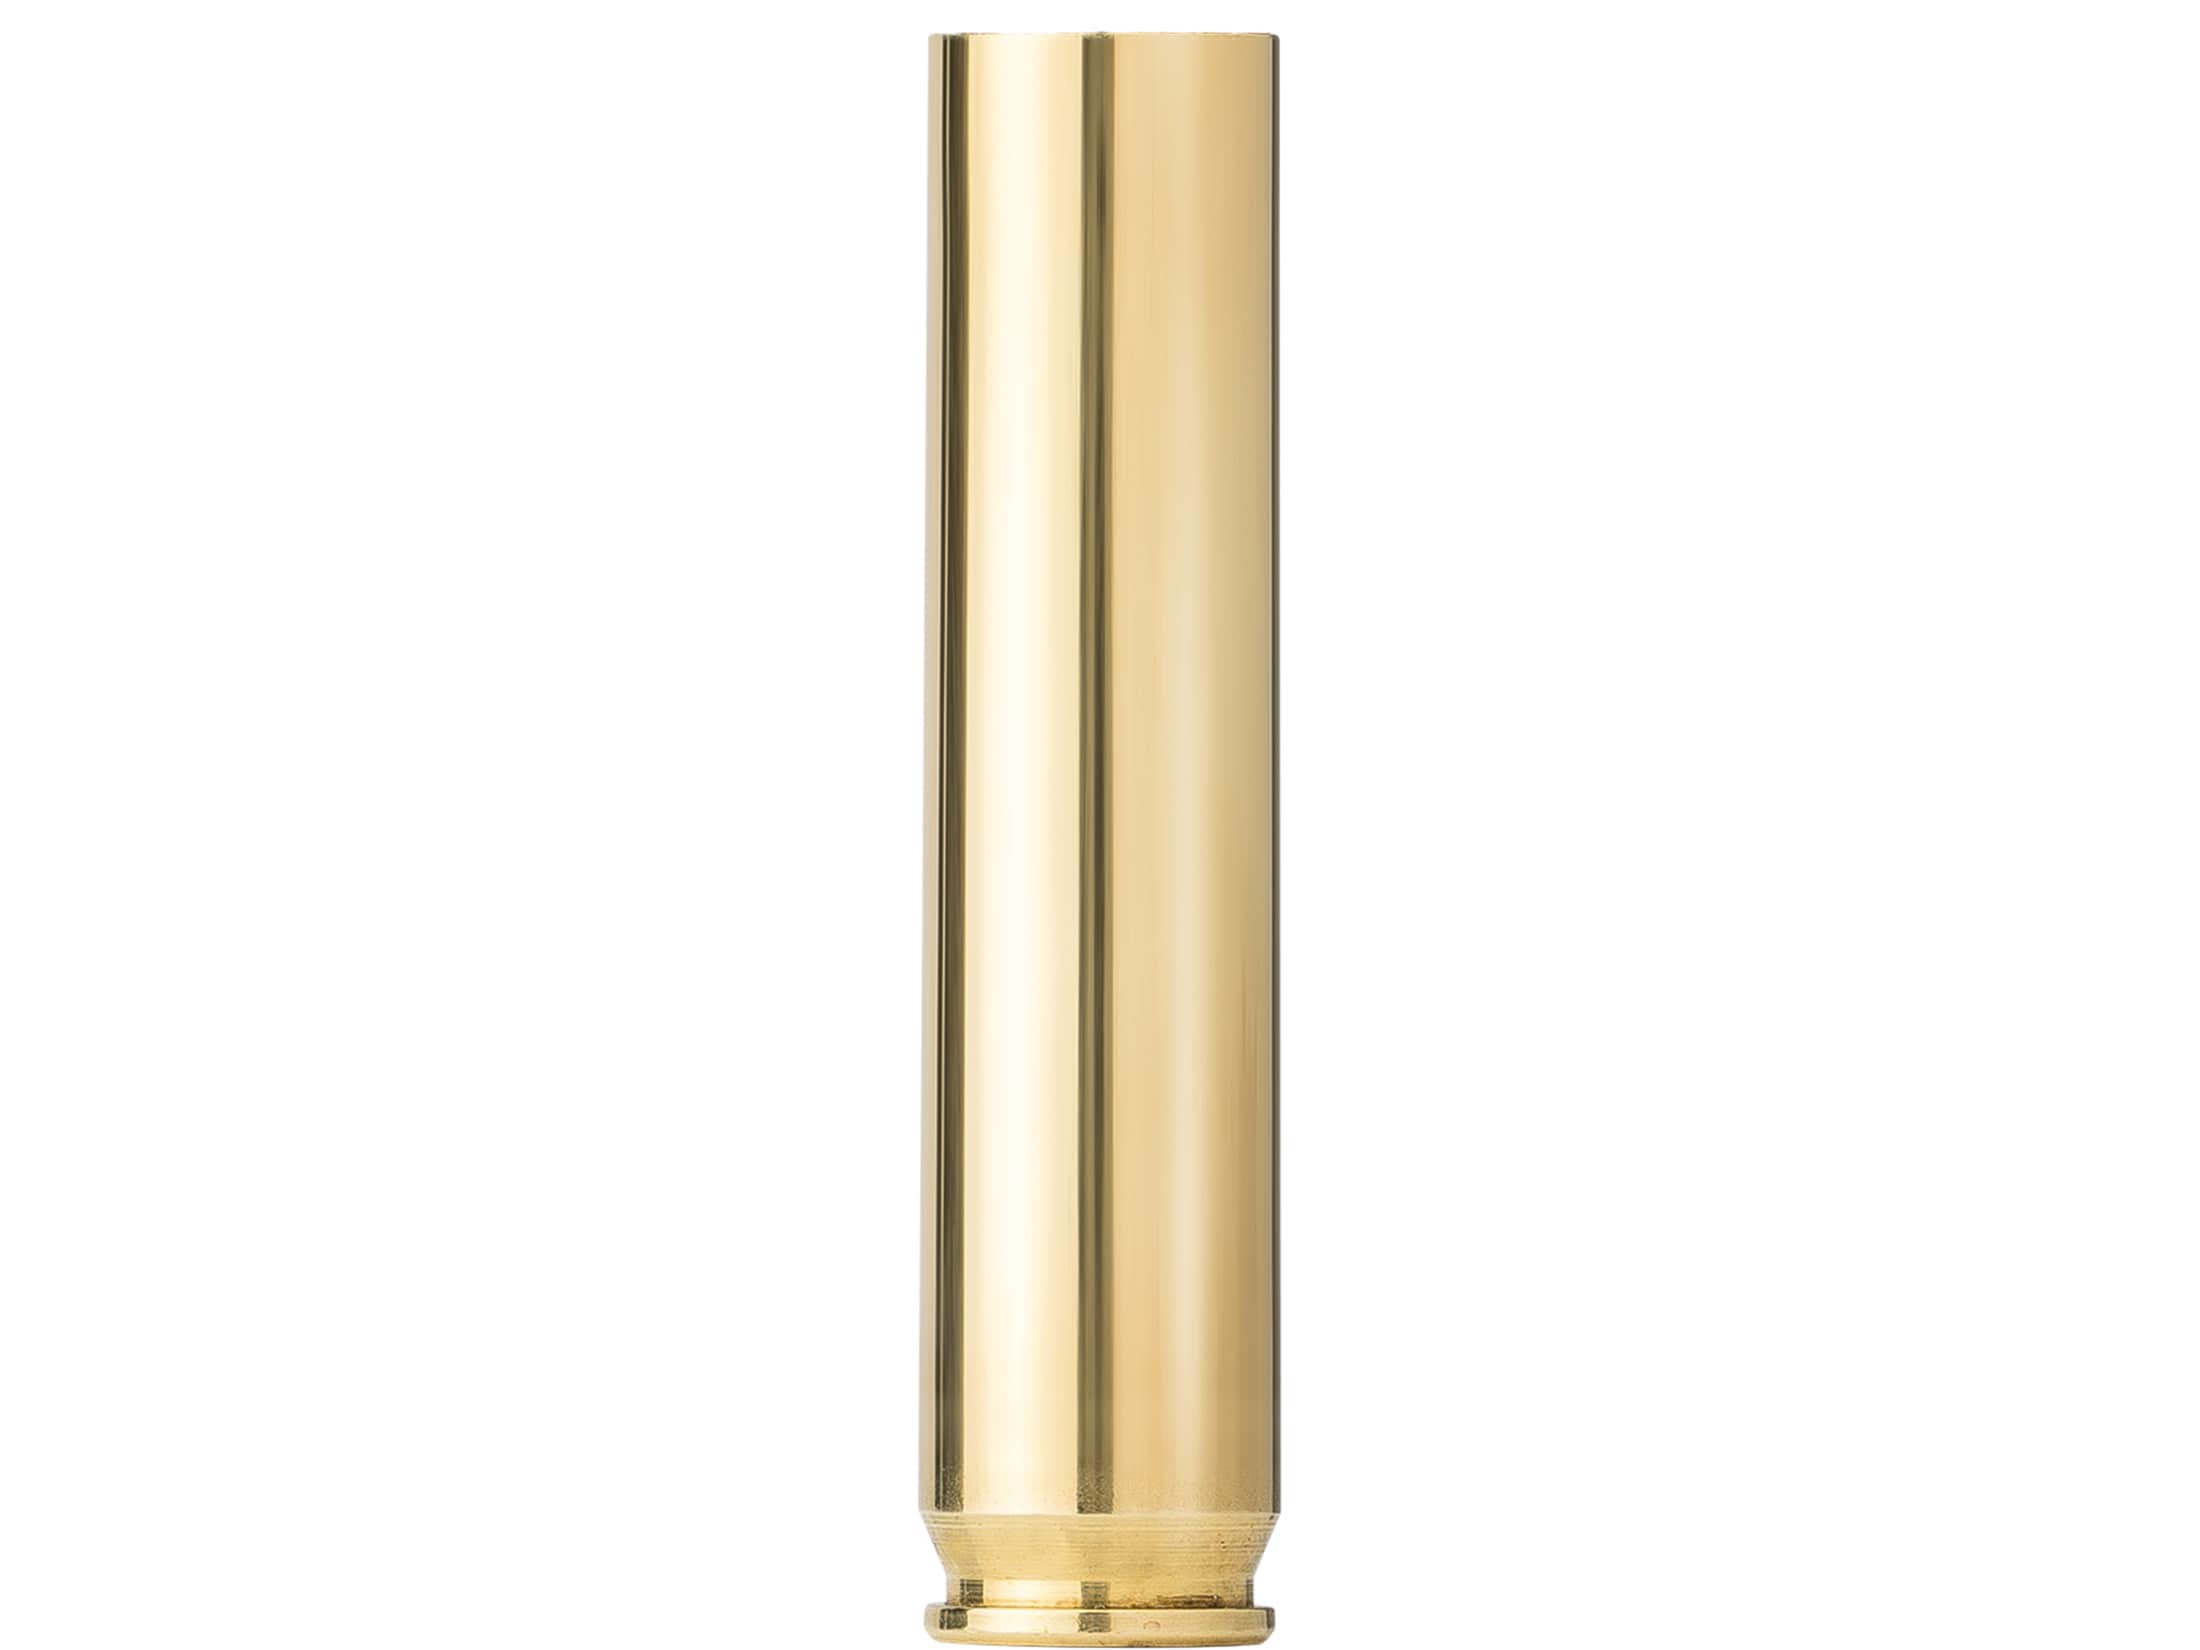 Winchester 350 Legend Brass For Sale | Don't Miss Out, Buy Now! - Alligator Arms